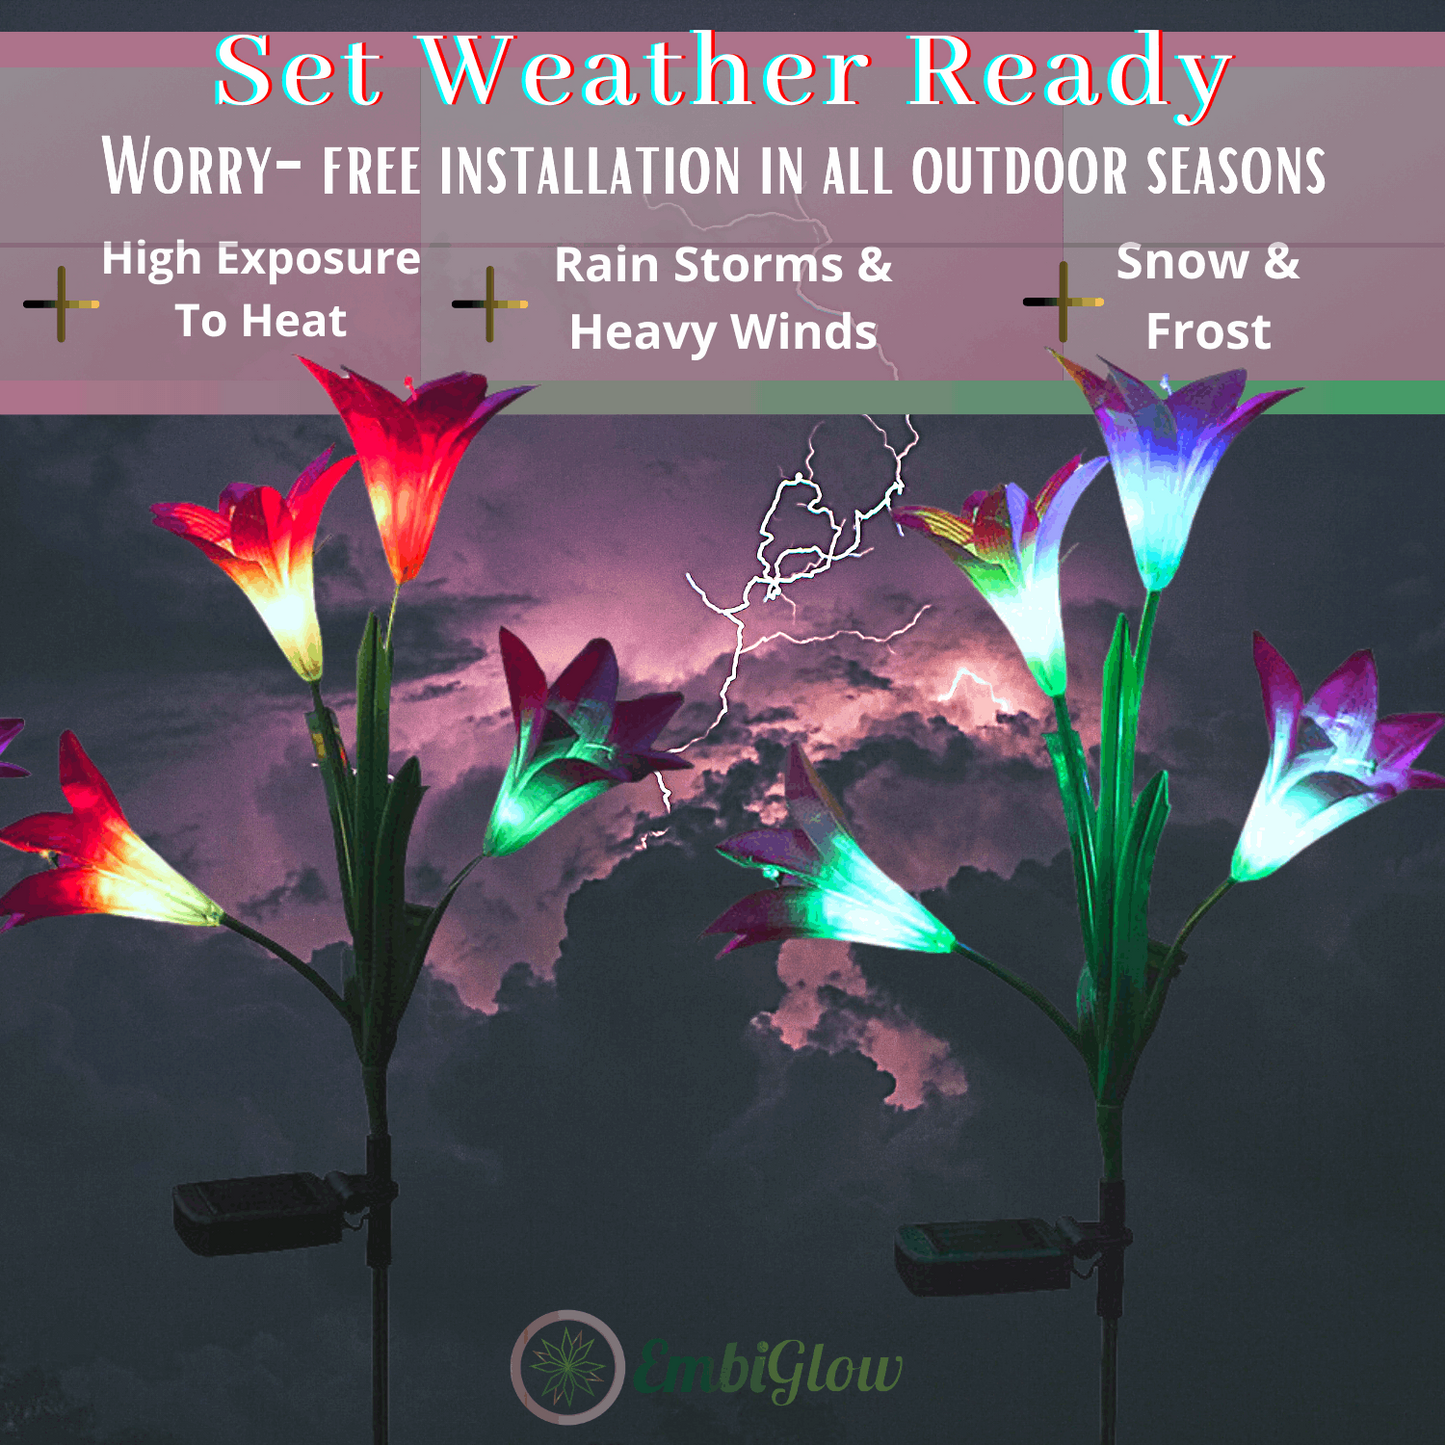 set of 2 led lights displayed over a storm background with benefit points listed 